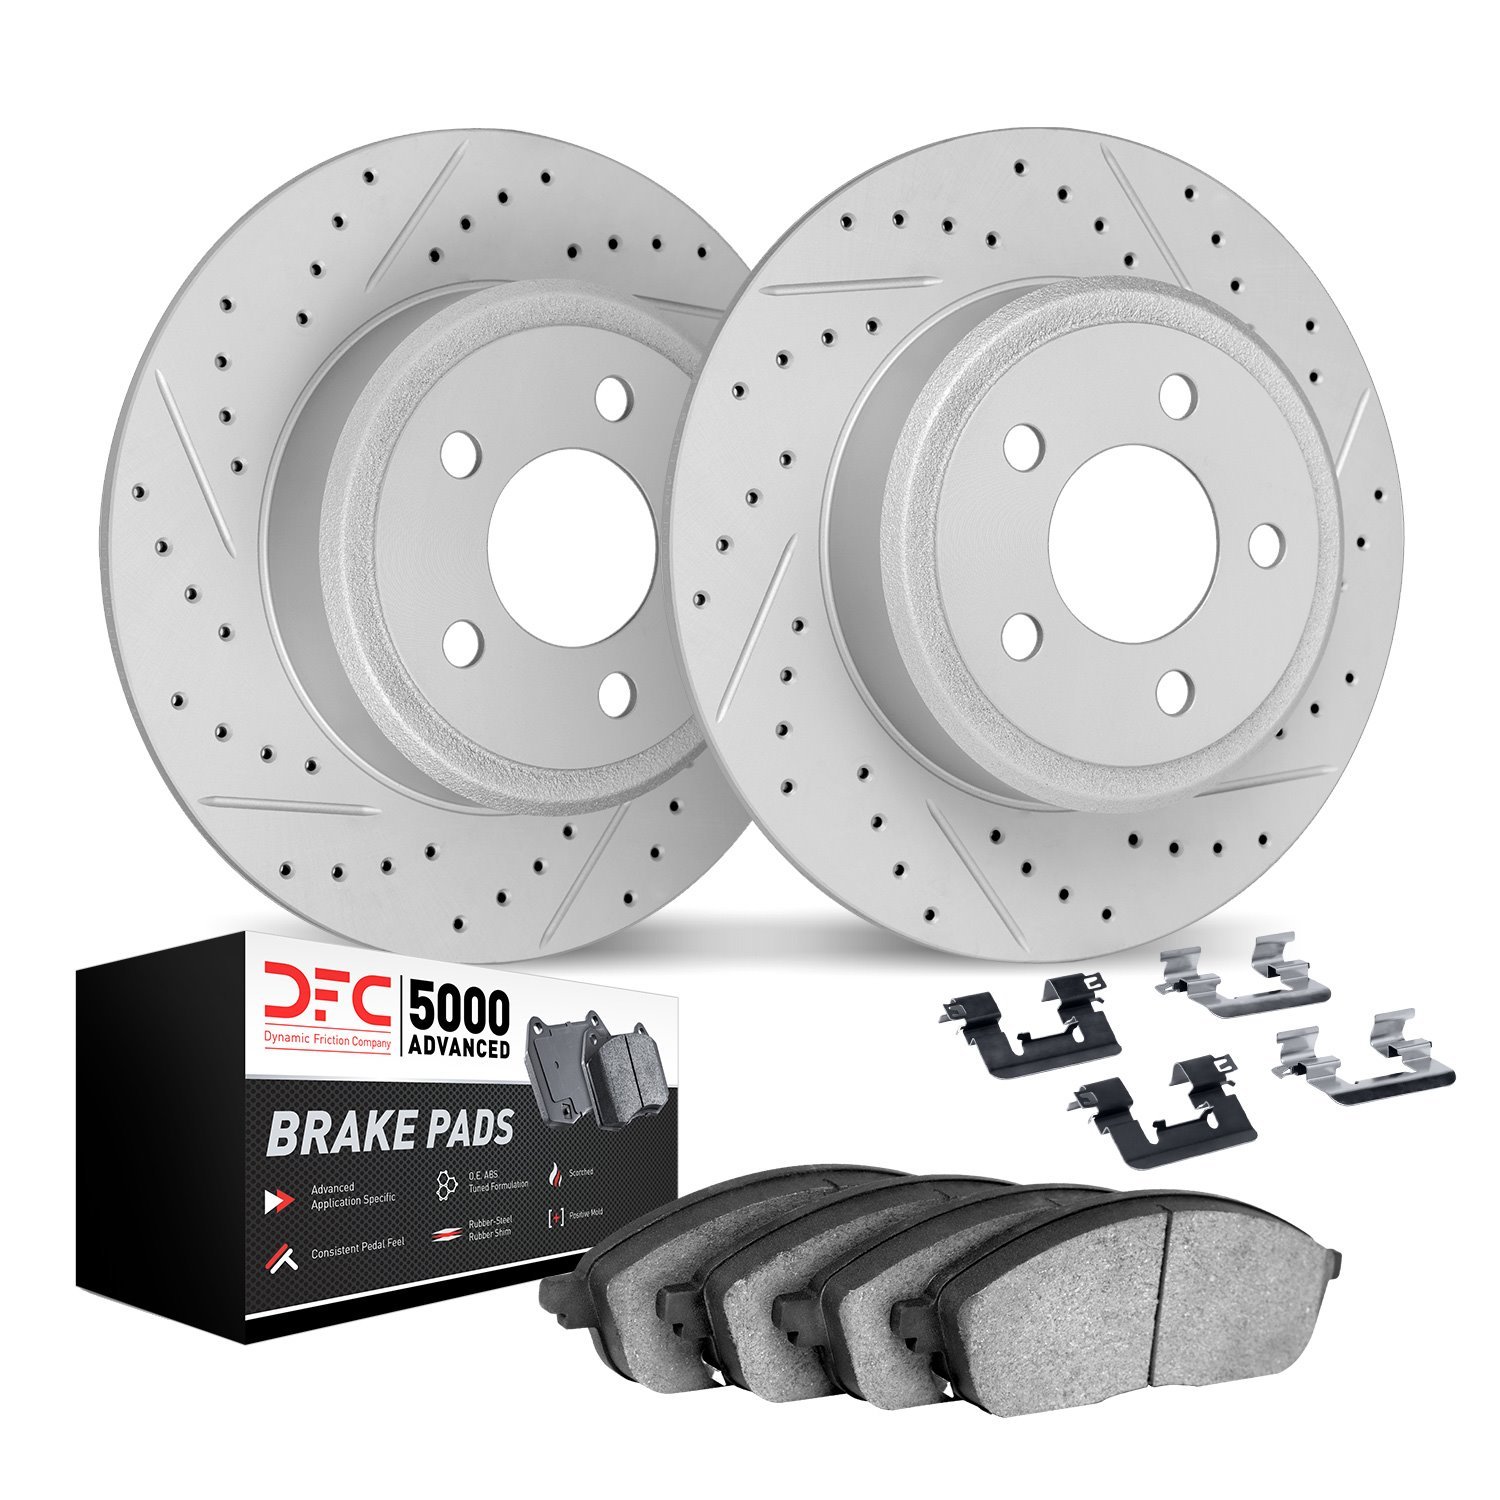 2512-80046 Geoperformance Drilled/Slotted Rotors w/5000 Advanced Brake Pads Kit & Hardware, Fits Select Ford/Lincoln/Mercury/Maz